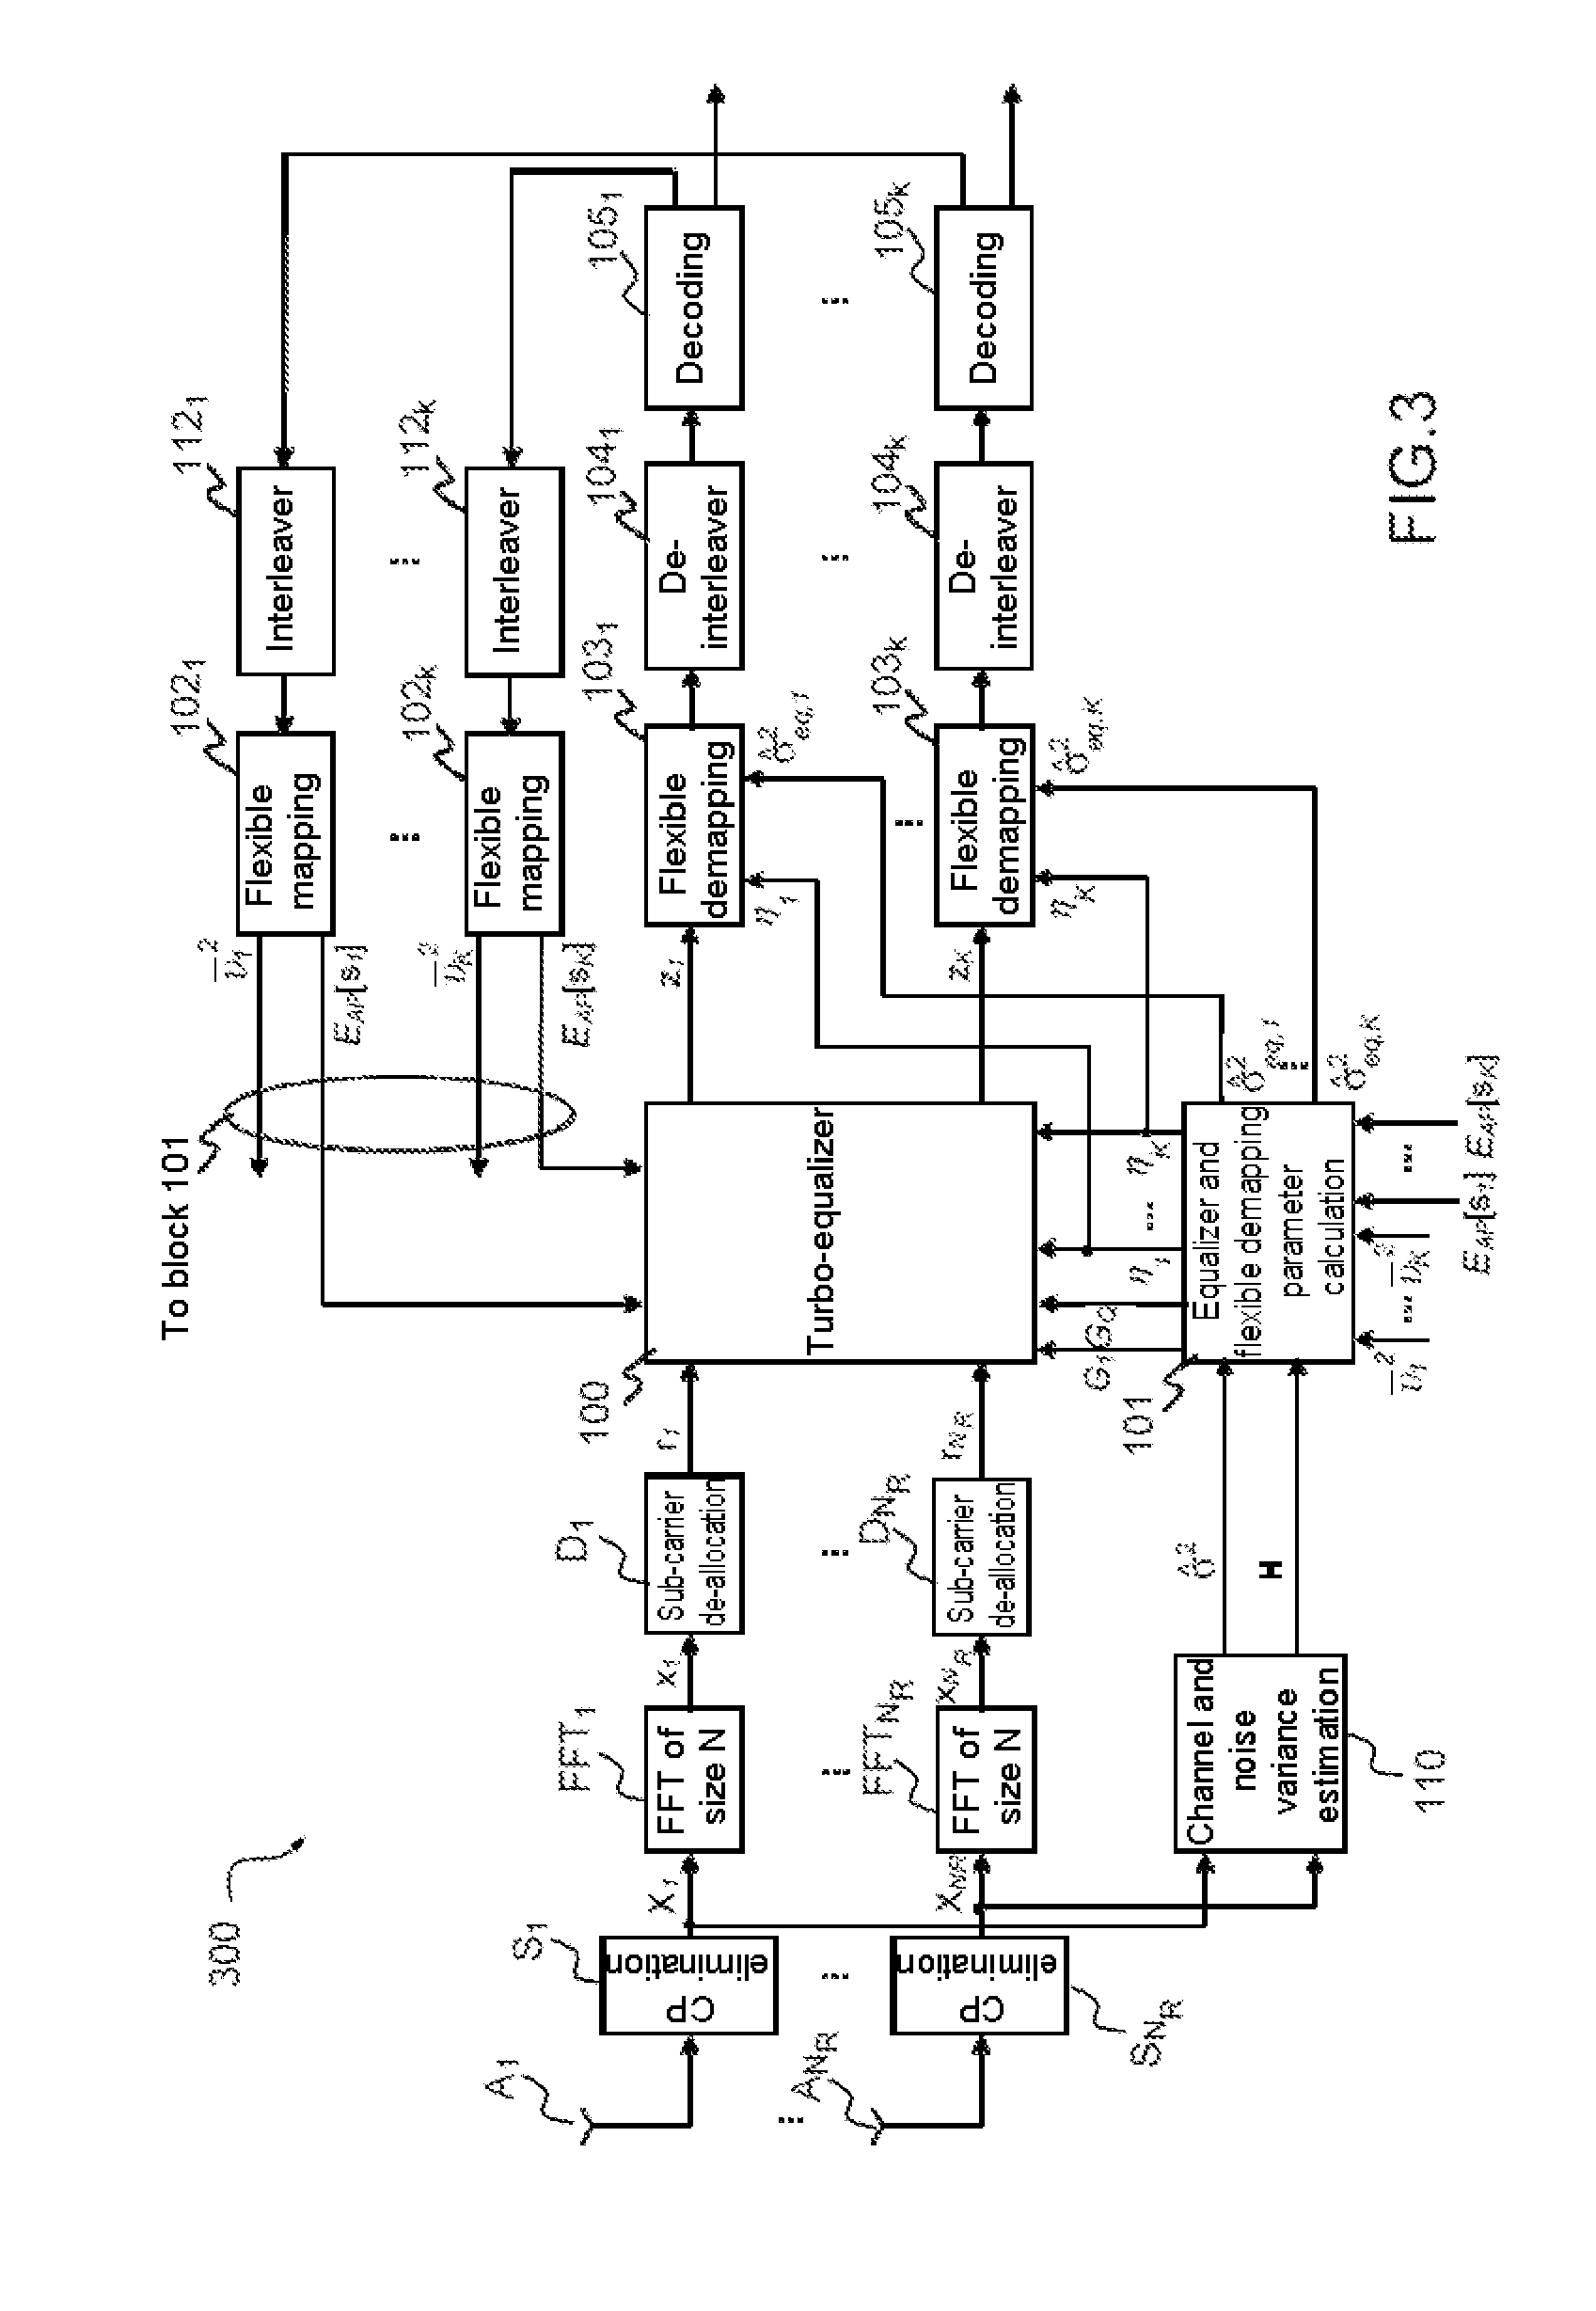 Method of widely linear turbo-equalization in a multi-user context and for a multi-channel multi-antenna receiver